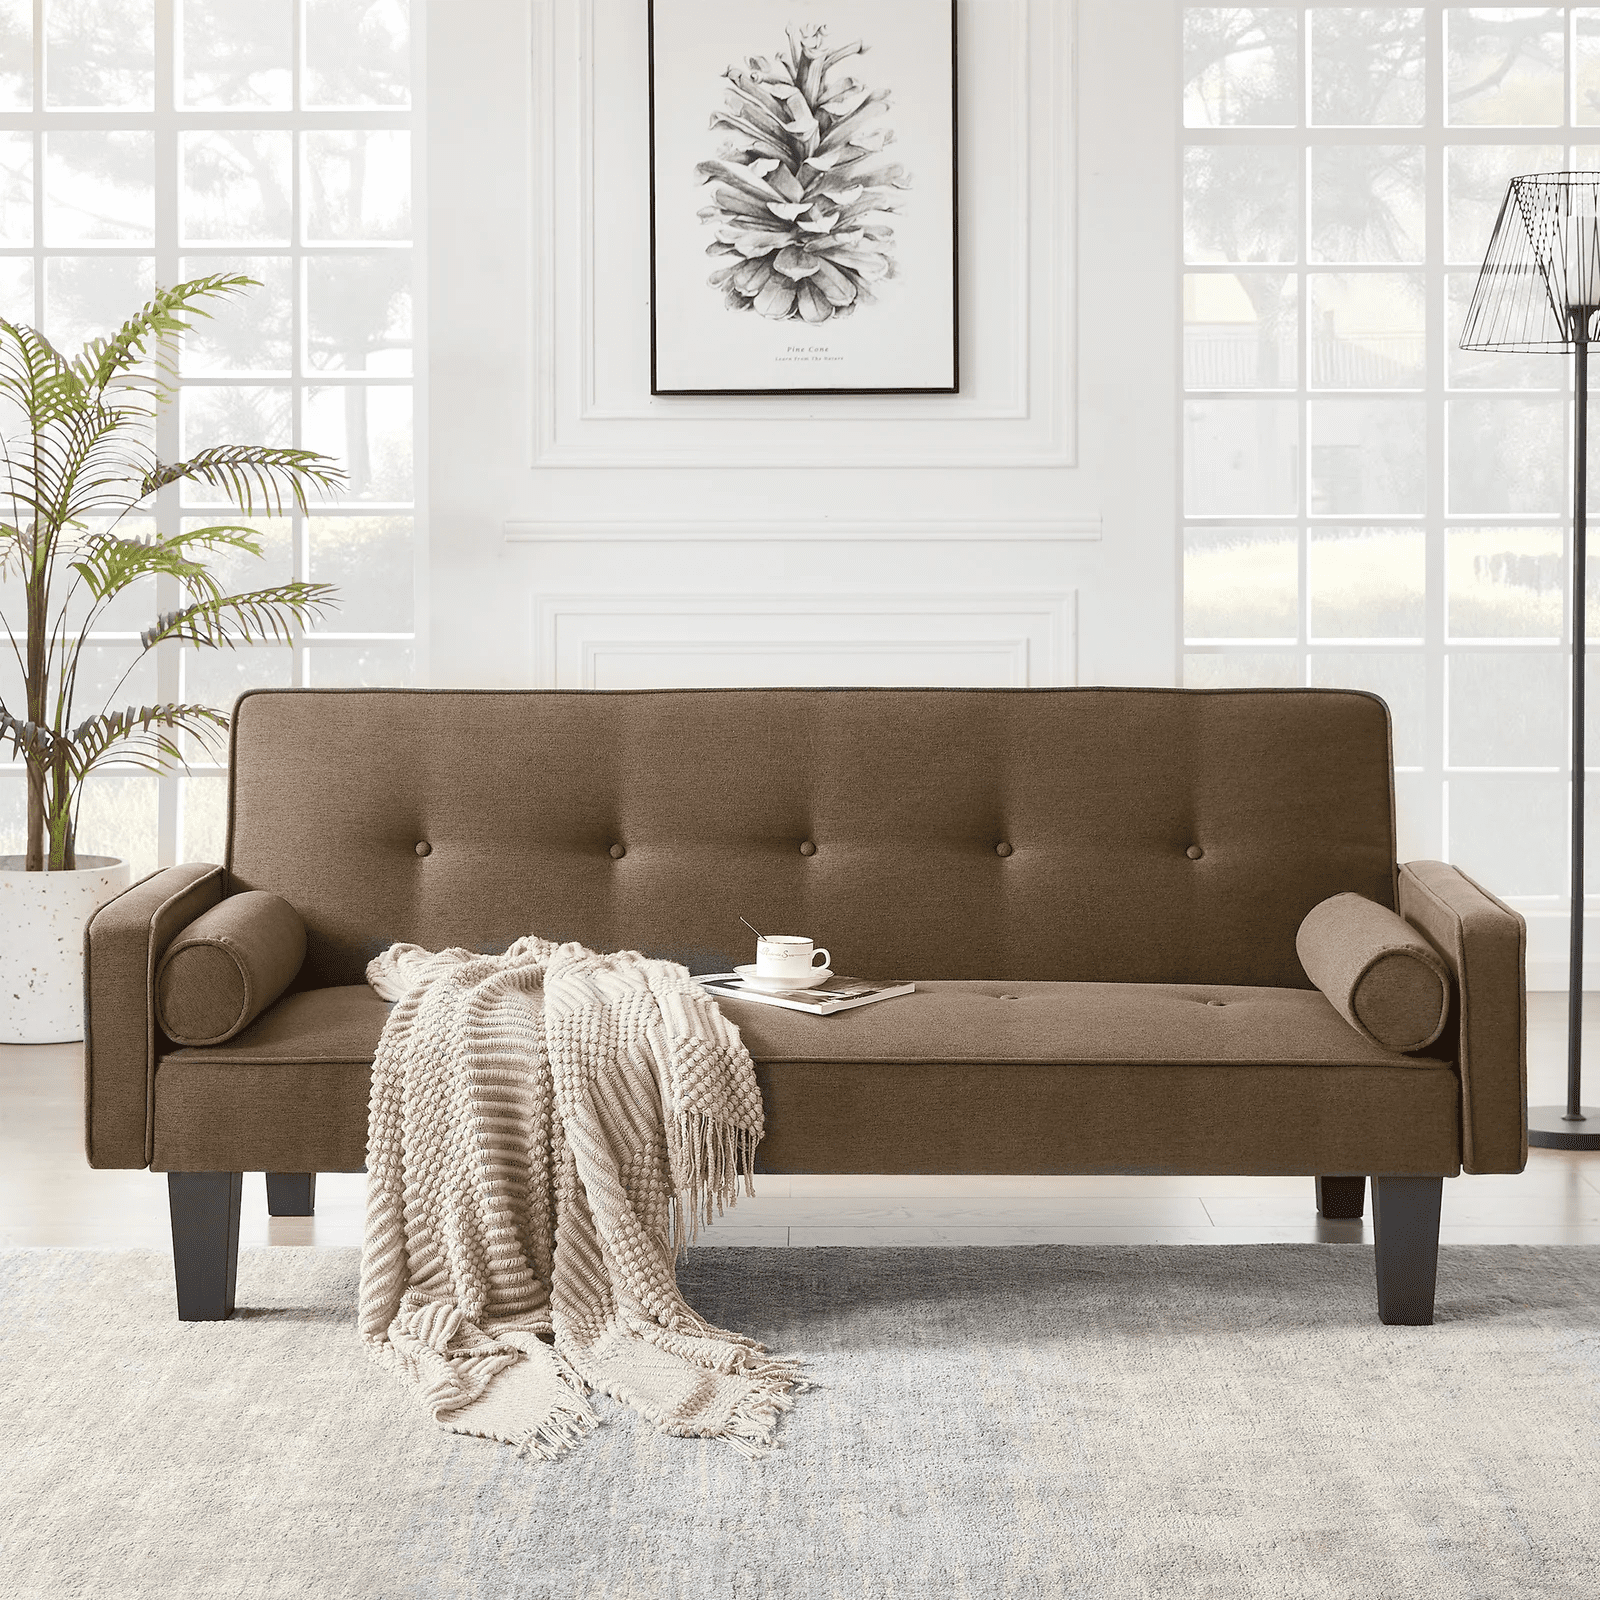 Bianlte Convertible Sofa Bed For Small